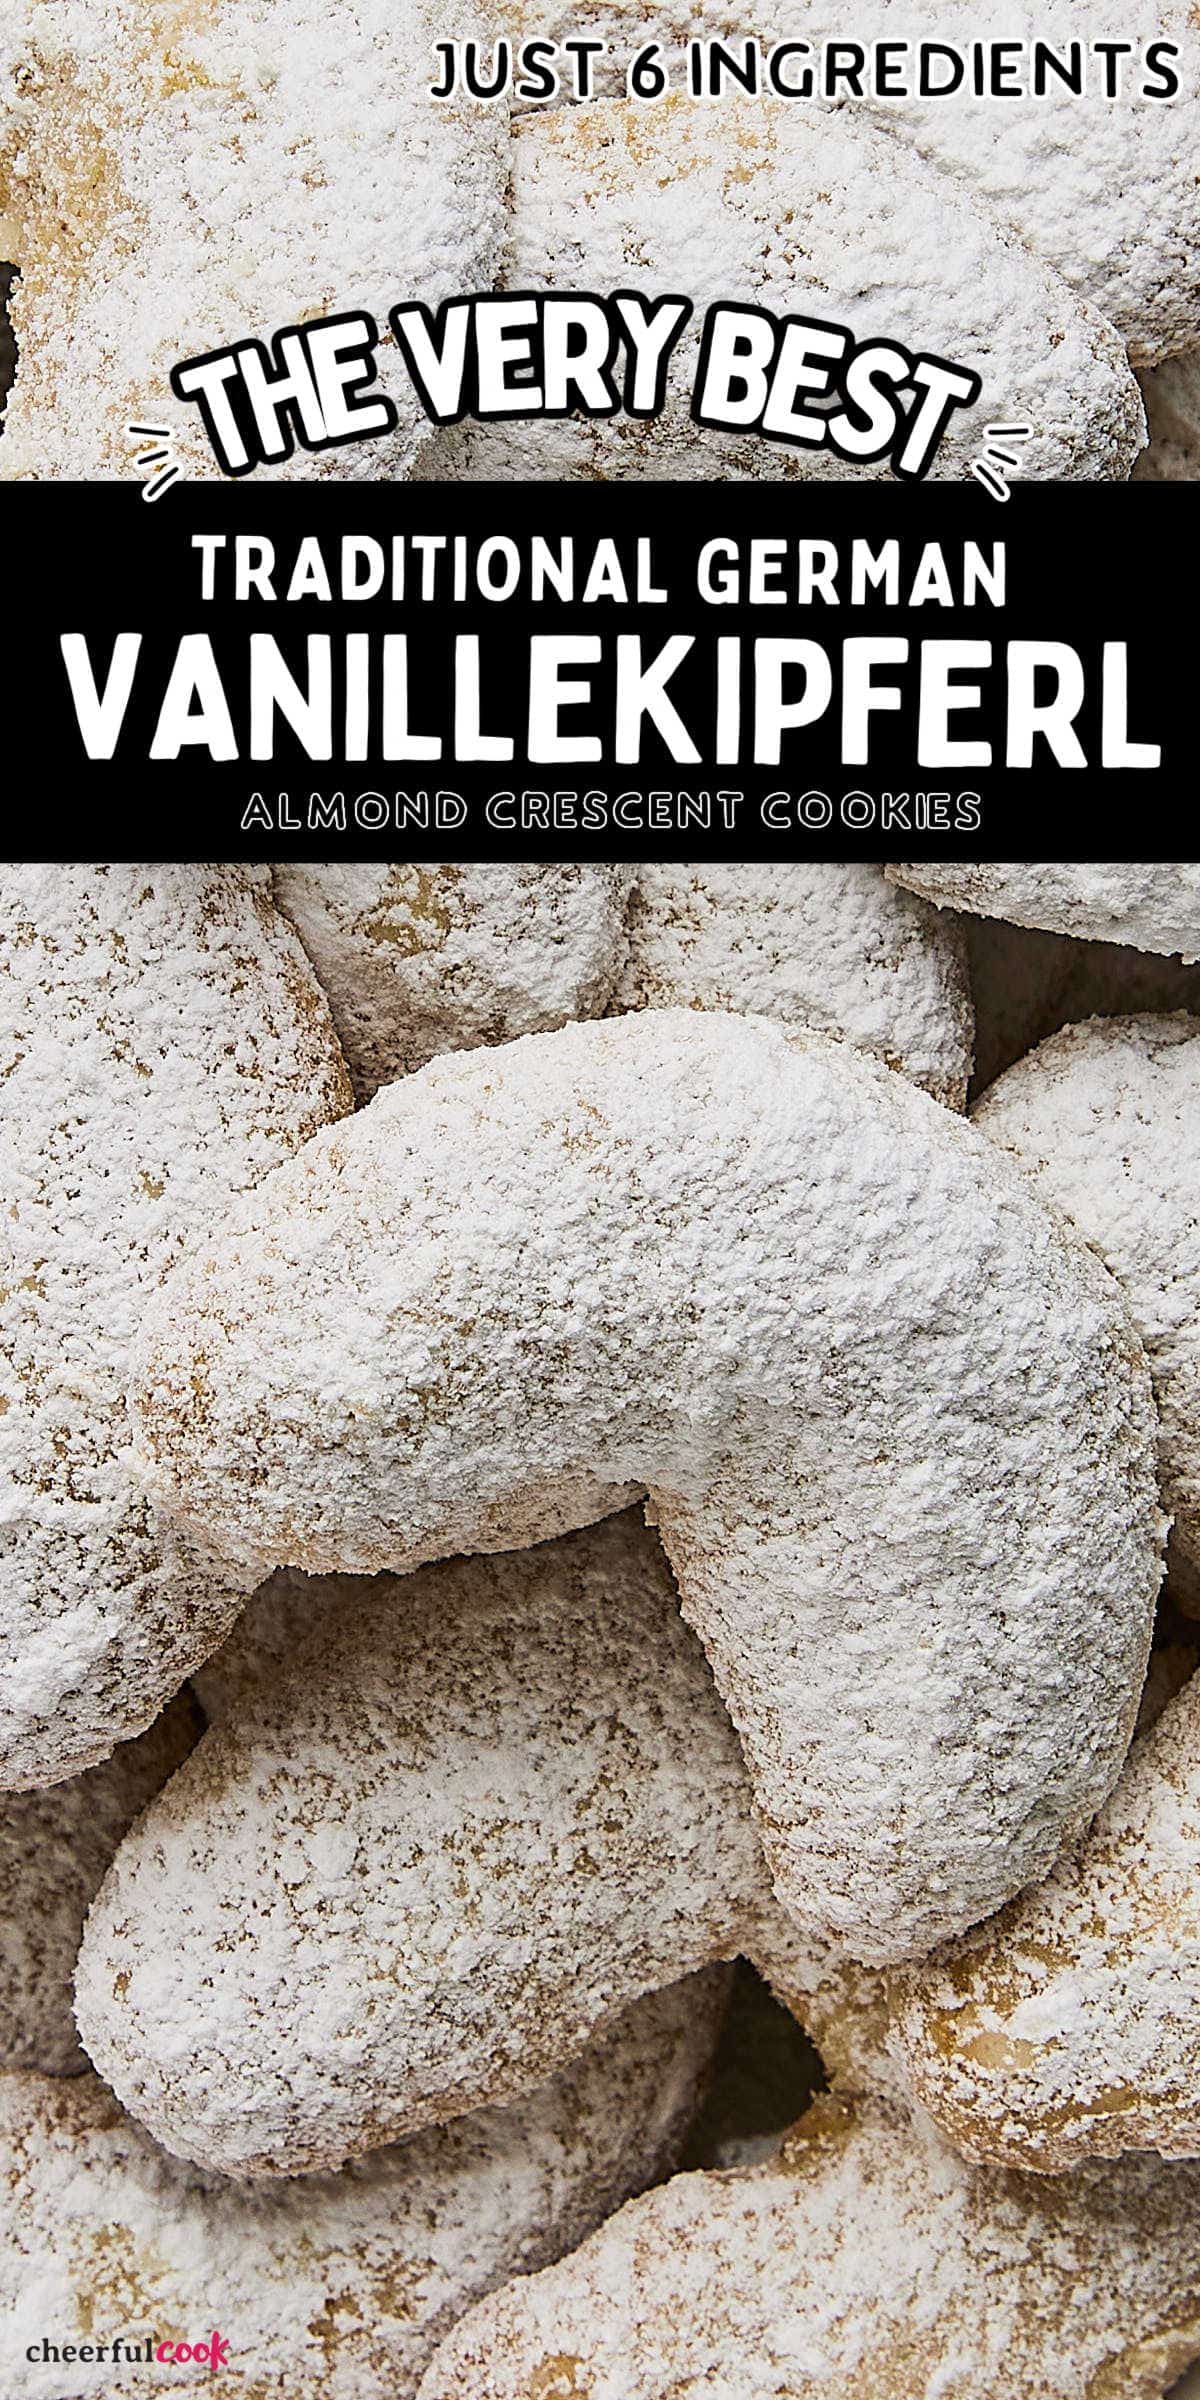 Get ready for your tastebuds to explode. Almond Crescent Cookies (also known as Vanillekipferl) are traditional German cookies that are buttery, nutty and sweet. They will quite literally melt in your mouth.  #cheerfulcook #germancookies #germanfood #omasrecipes #vanillekipferl #almond #christmas ♡ cheerfulcook.com via @cheerfulcook